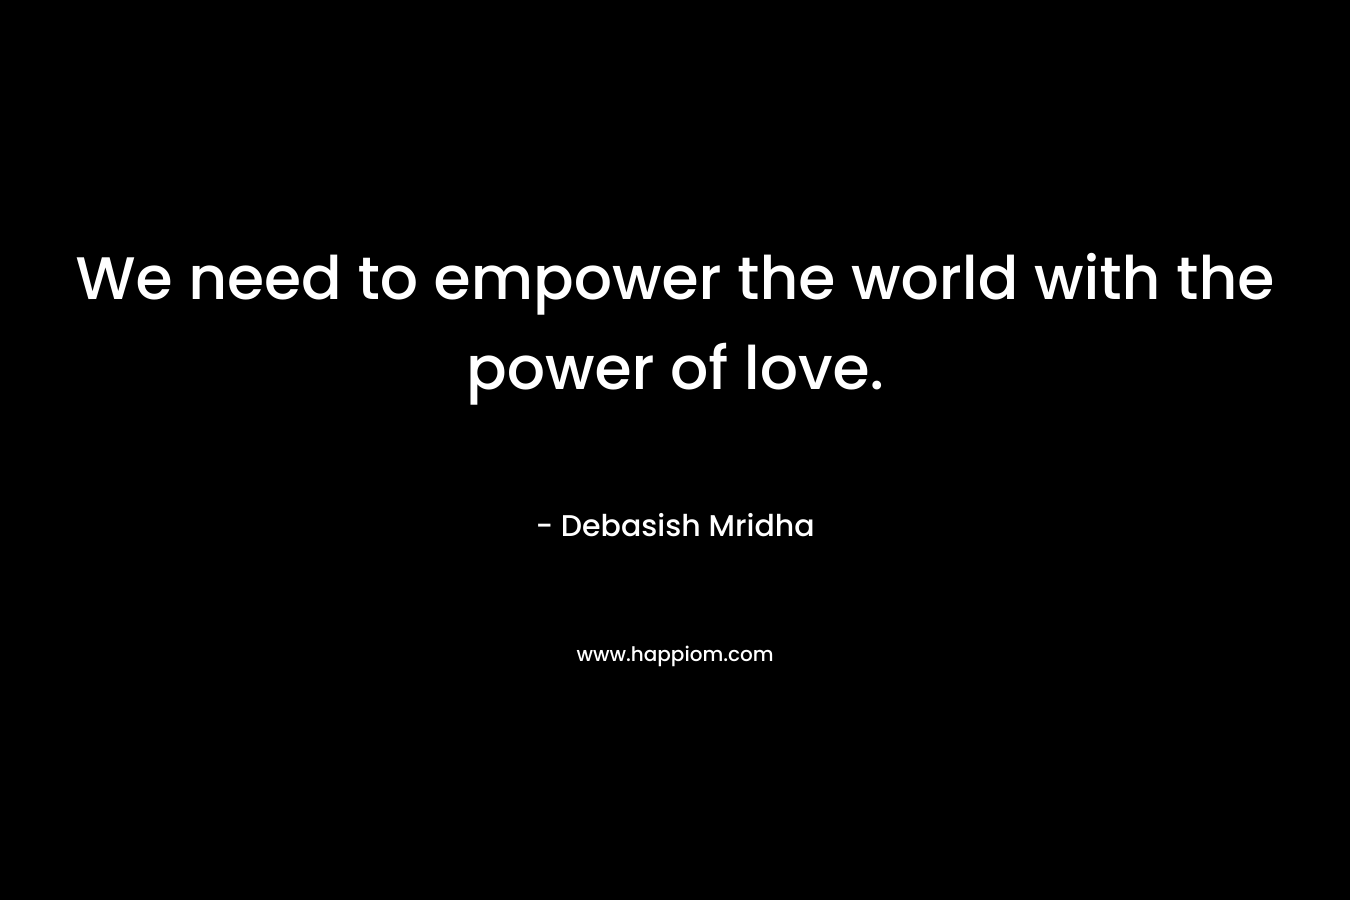 We need to empower the world with the power of love.